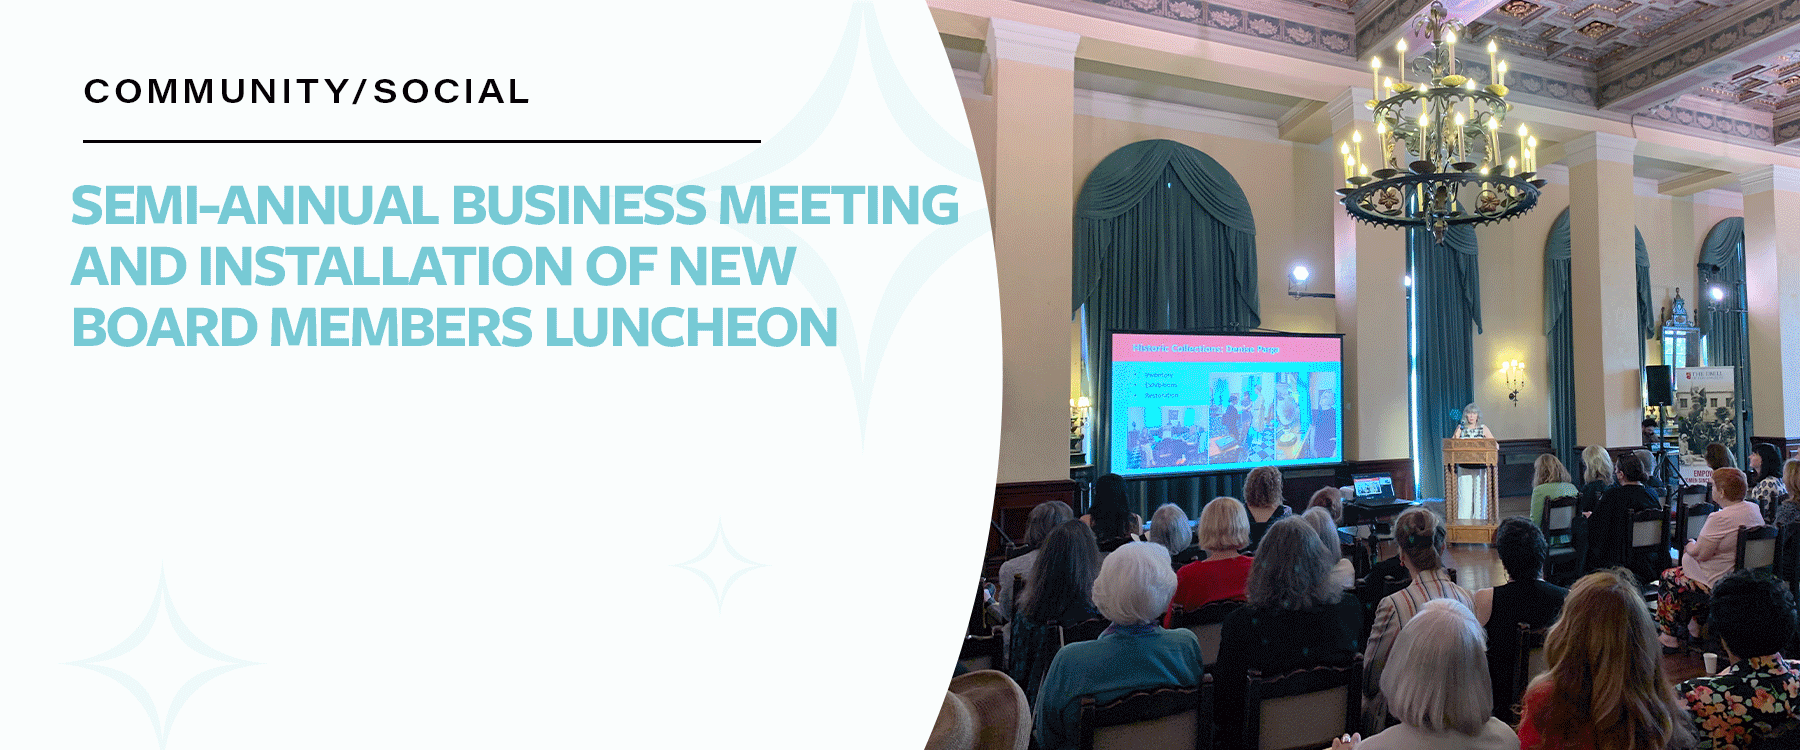 Semi-Annual Business Meeting and Installation of New Board Members Luncheon